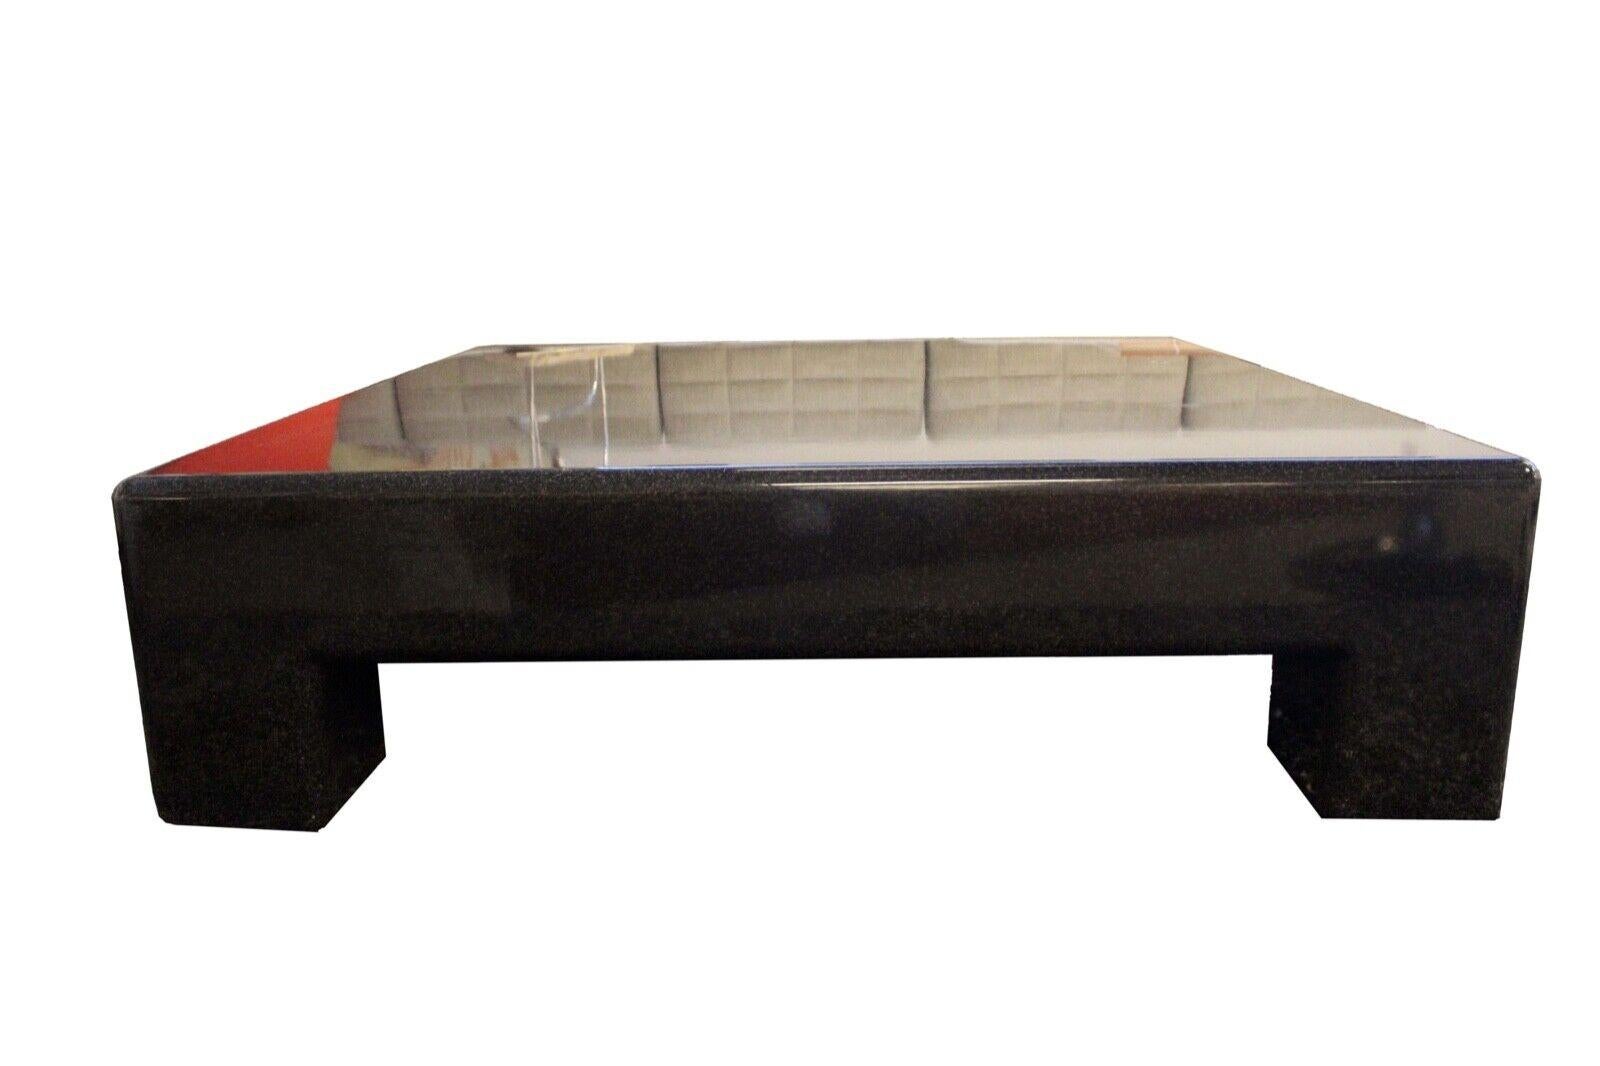 We present this extremely heavy and sturdy beautifully designed stone composite square large black coffee table. In excellent condition. Dimensions: 53.5